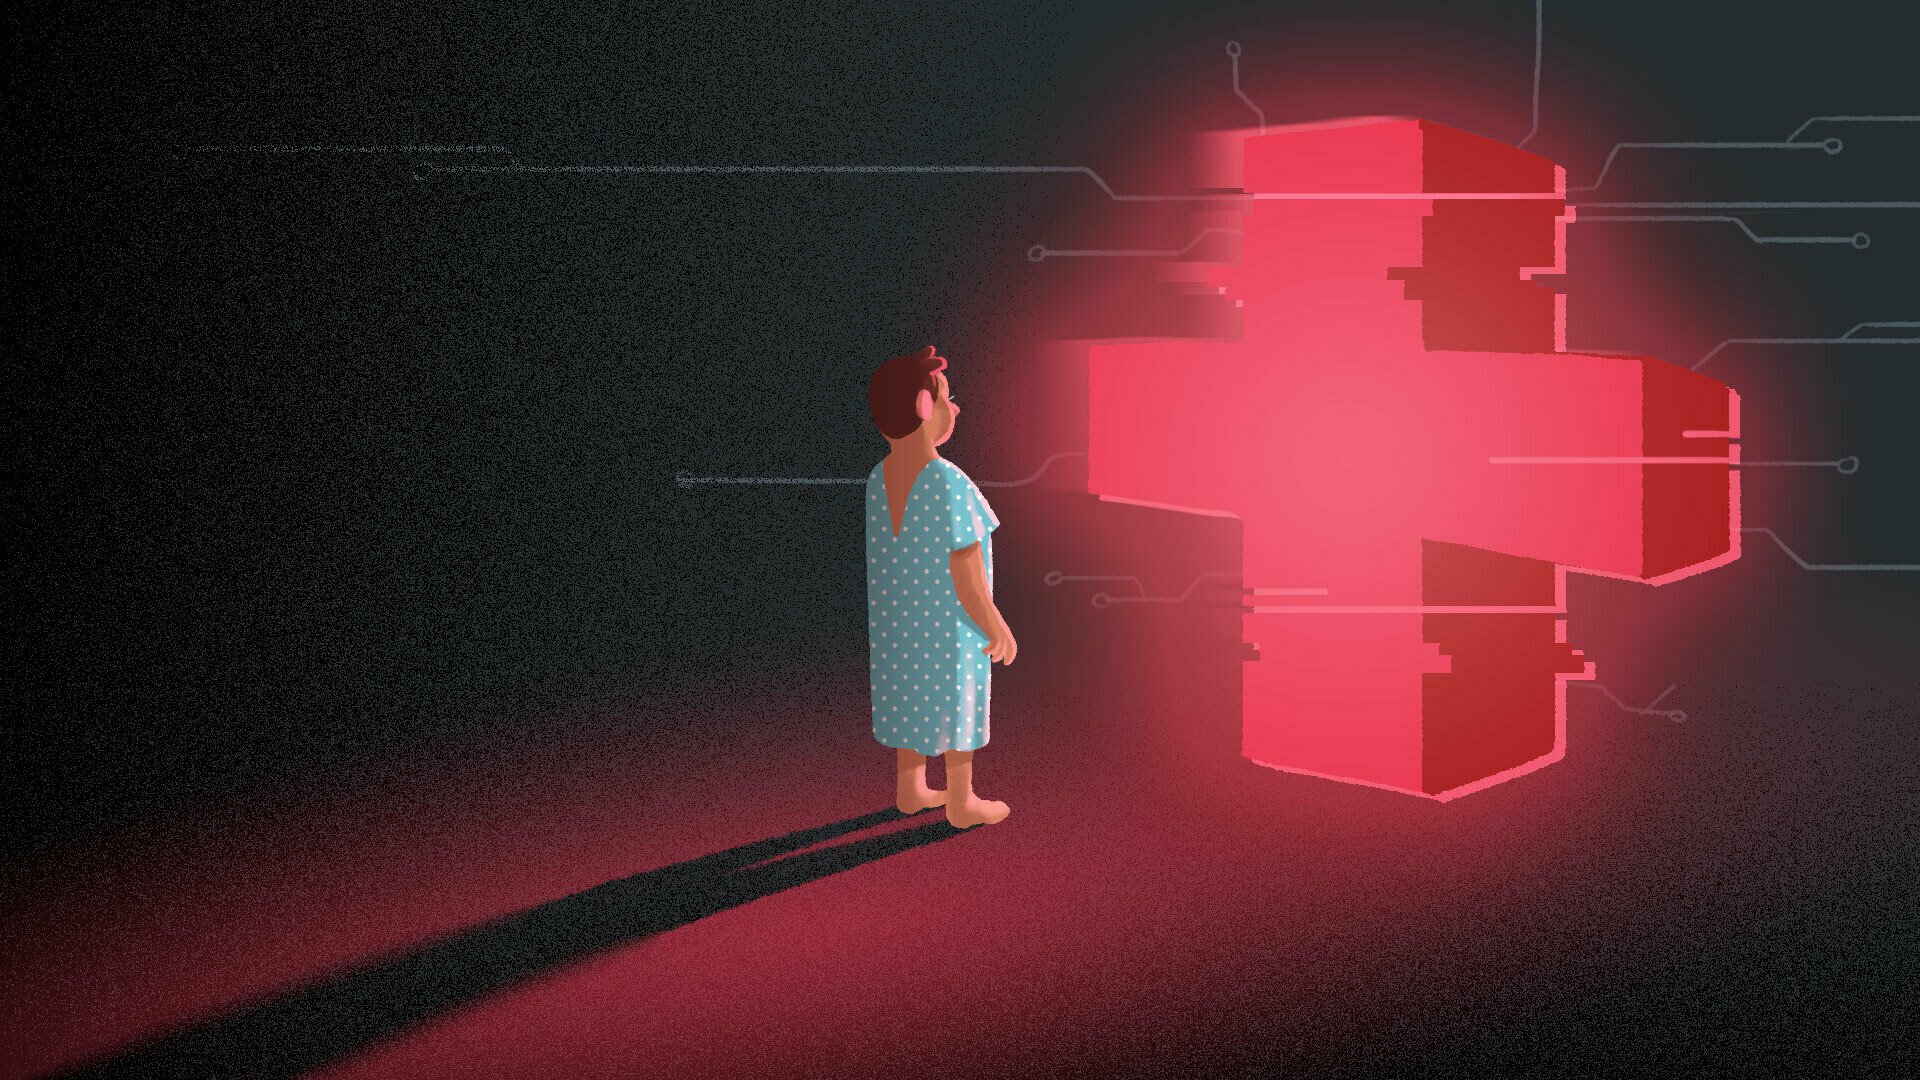 Illustration: A person in a blue hospital gown stands in front of a giant red cross emanating a neon light. The cross is surrounded by a grey digital web.